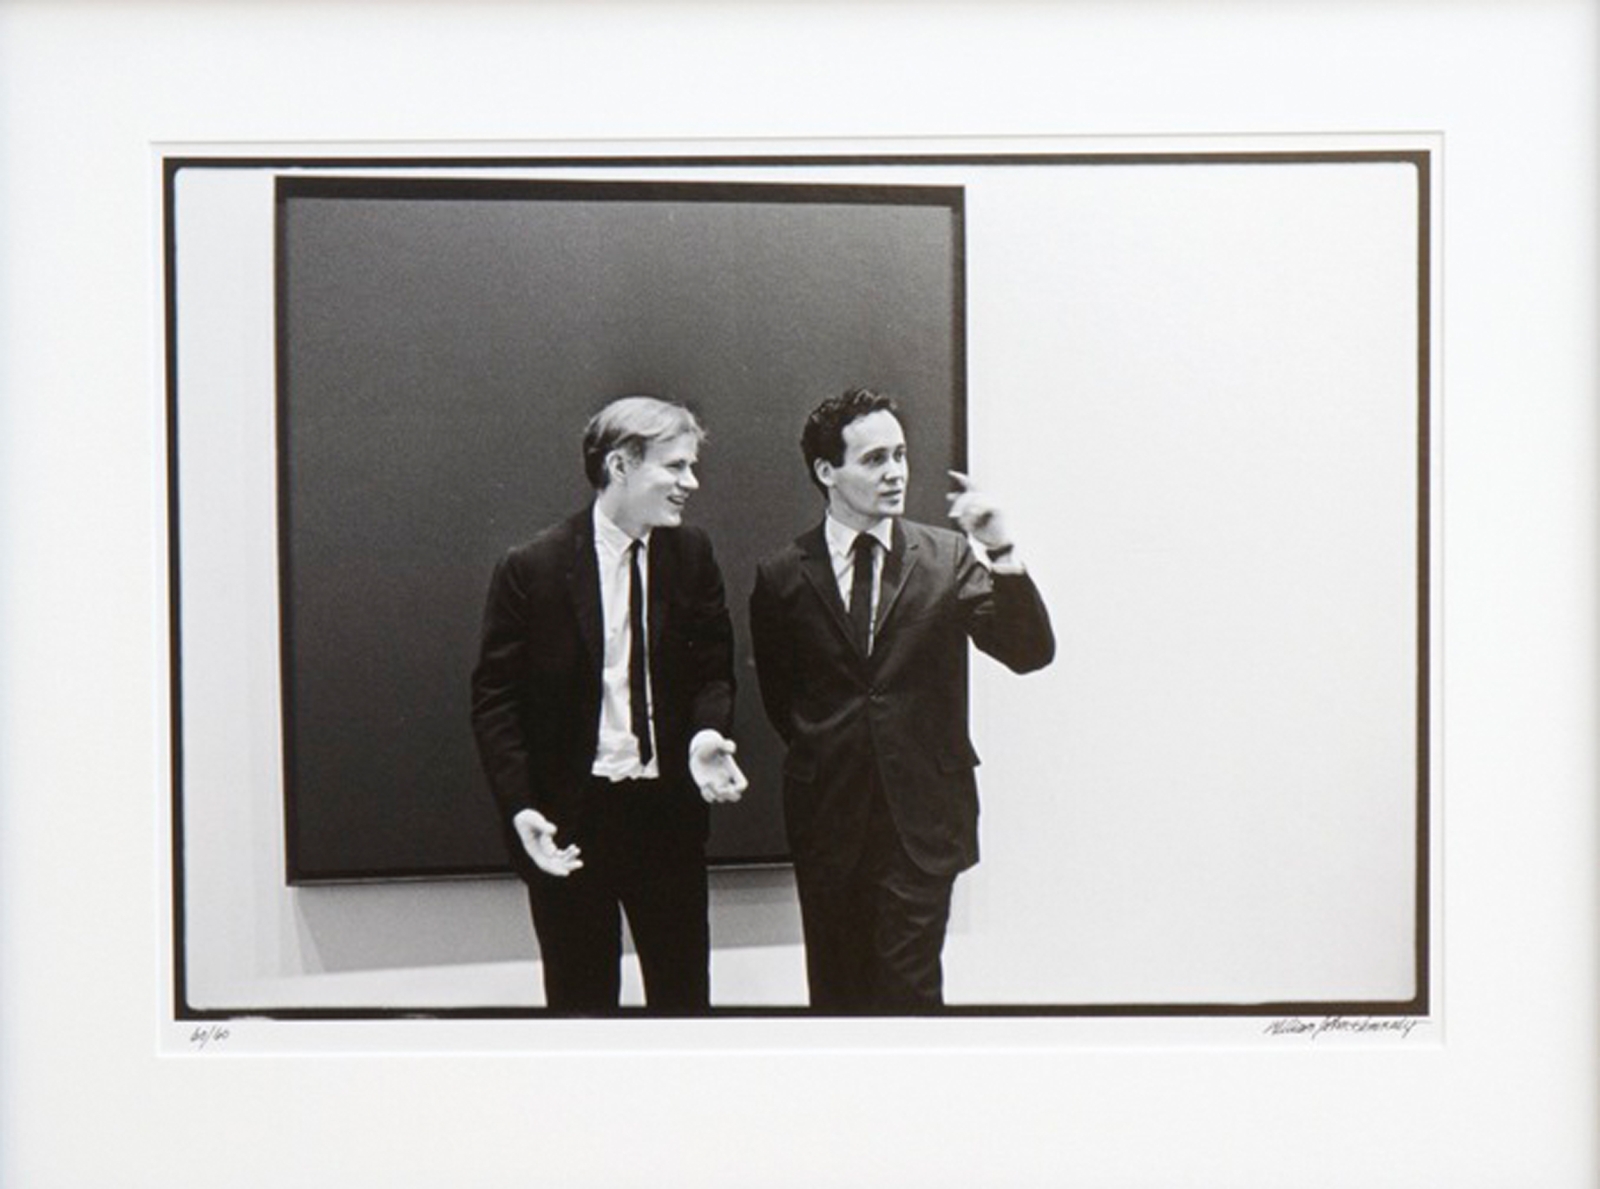 Andy Warhol and Indiana in front of an unidentified canvas by Ad Reinhardt at the opening of the exhibition Americans 1963 at the Museum of Modern Art, New York, May 21, 1963. Photo: &amp;copy;William John Kennedy. Image courtesy of William John Kennedy/Kiwiartsgroup.com